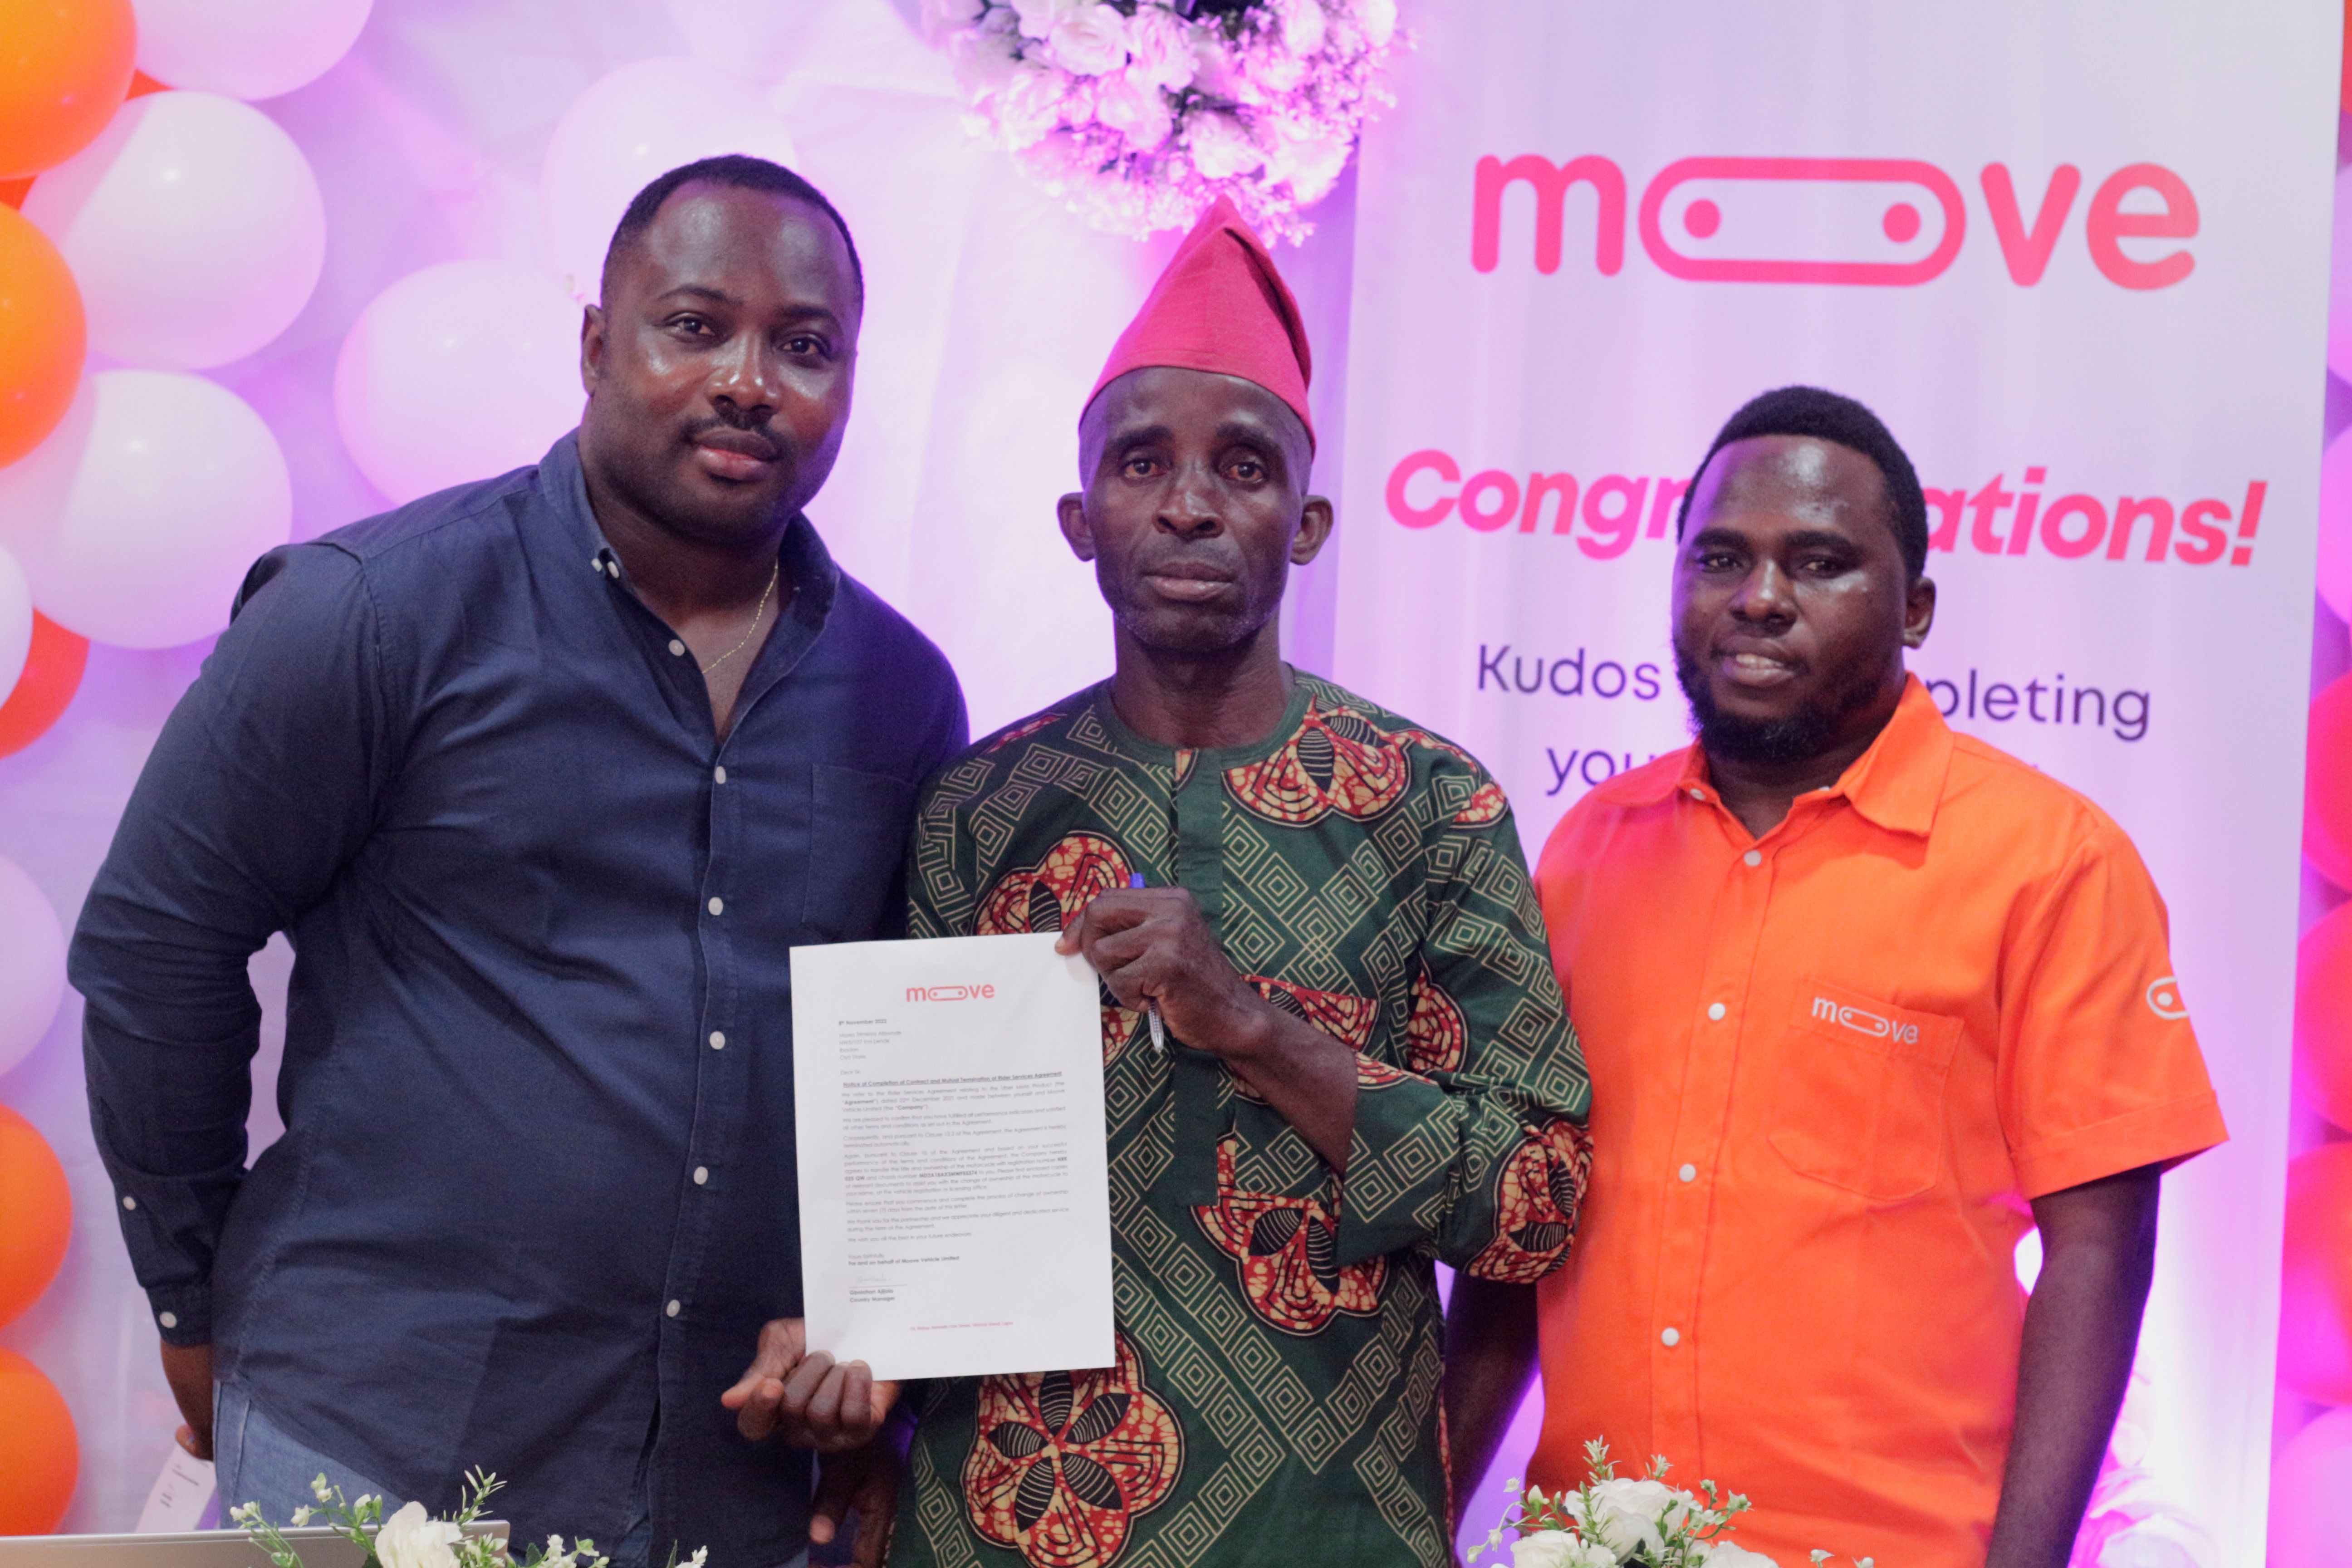 Moove Customers in Ibadan, Nigeria celebrating full ownership of their vehicles. L to R: Kelechi Eze, Legal Counsel for Moove, Nigeria, Moses Trimisiyu Alawode, Moove customer, and Gbolahan Ajijola, Mooves Country Manager for Nigeria.